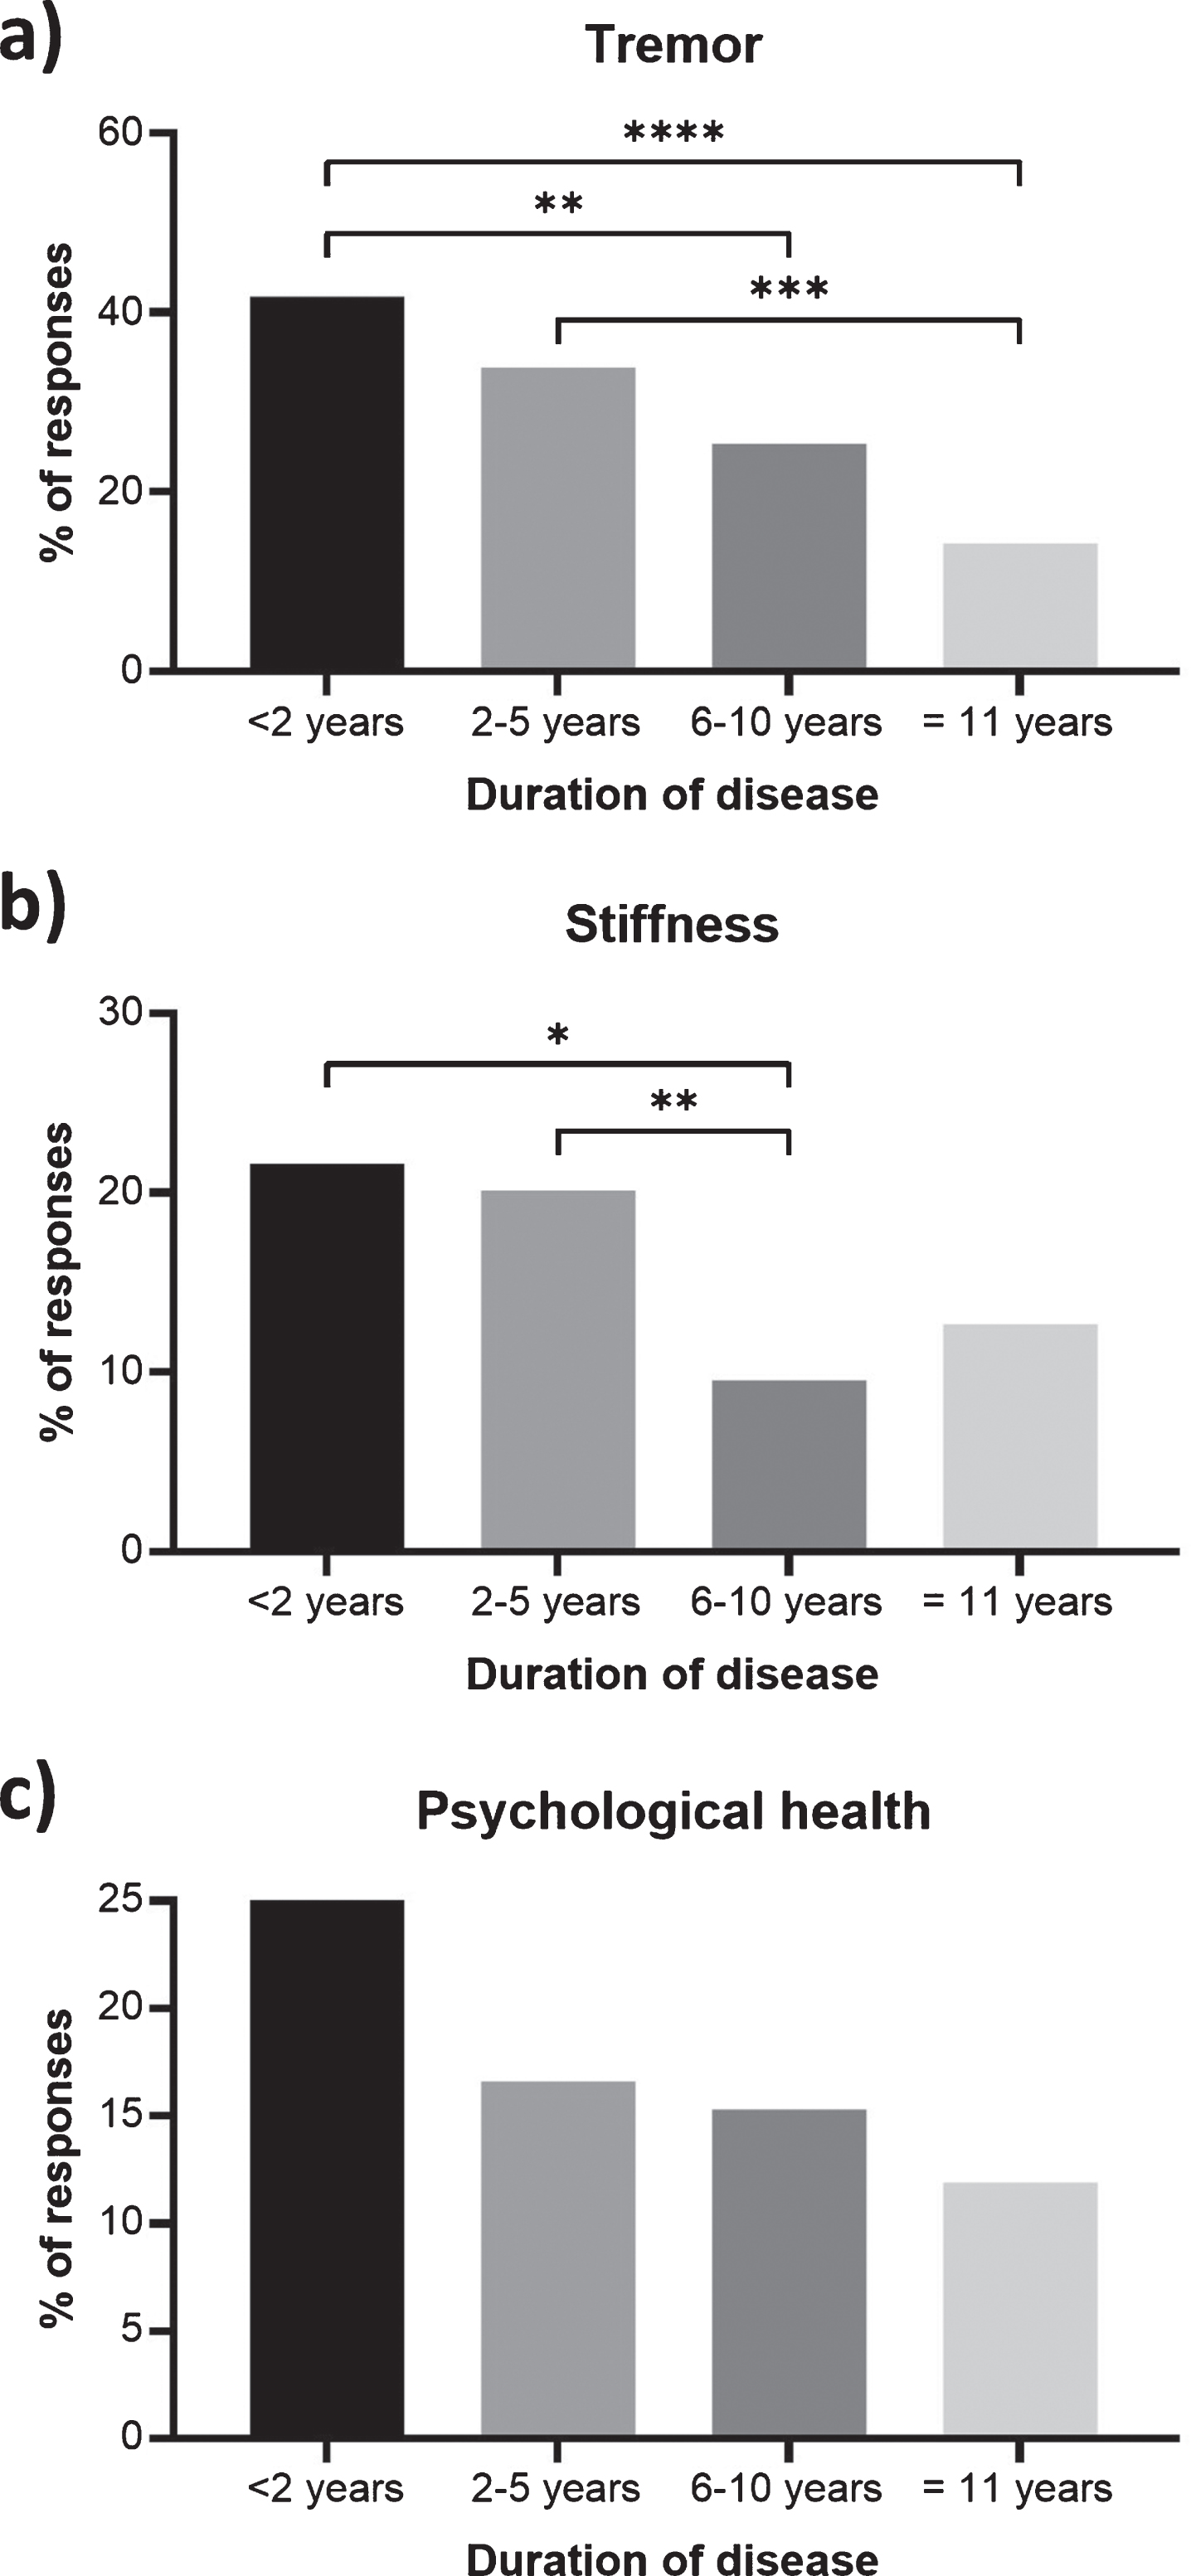 Symptoms of Parkinson’s disease that were reported as a priority for improvement less frequently with disease duration. Percentages show the respondents with a duration of < 2 years (n = 134), 2–5 years (n = 313), 6–10 years (n = 209) and 11 + years (n = 126) reporting (a) tremor, (b) stiffness, and (c) psychological health within their 3 priority areas. Statistical significant between duration groups (Dunn’s multiple comparisons tests) are presented as asterisks: *p < 0.05; **p < 0.01; ***p < 0.001; ****p < 0.0001. Responses from bereaved partners, family members or friends have been excluded as no duration data is available.